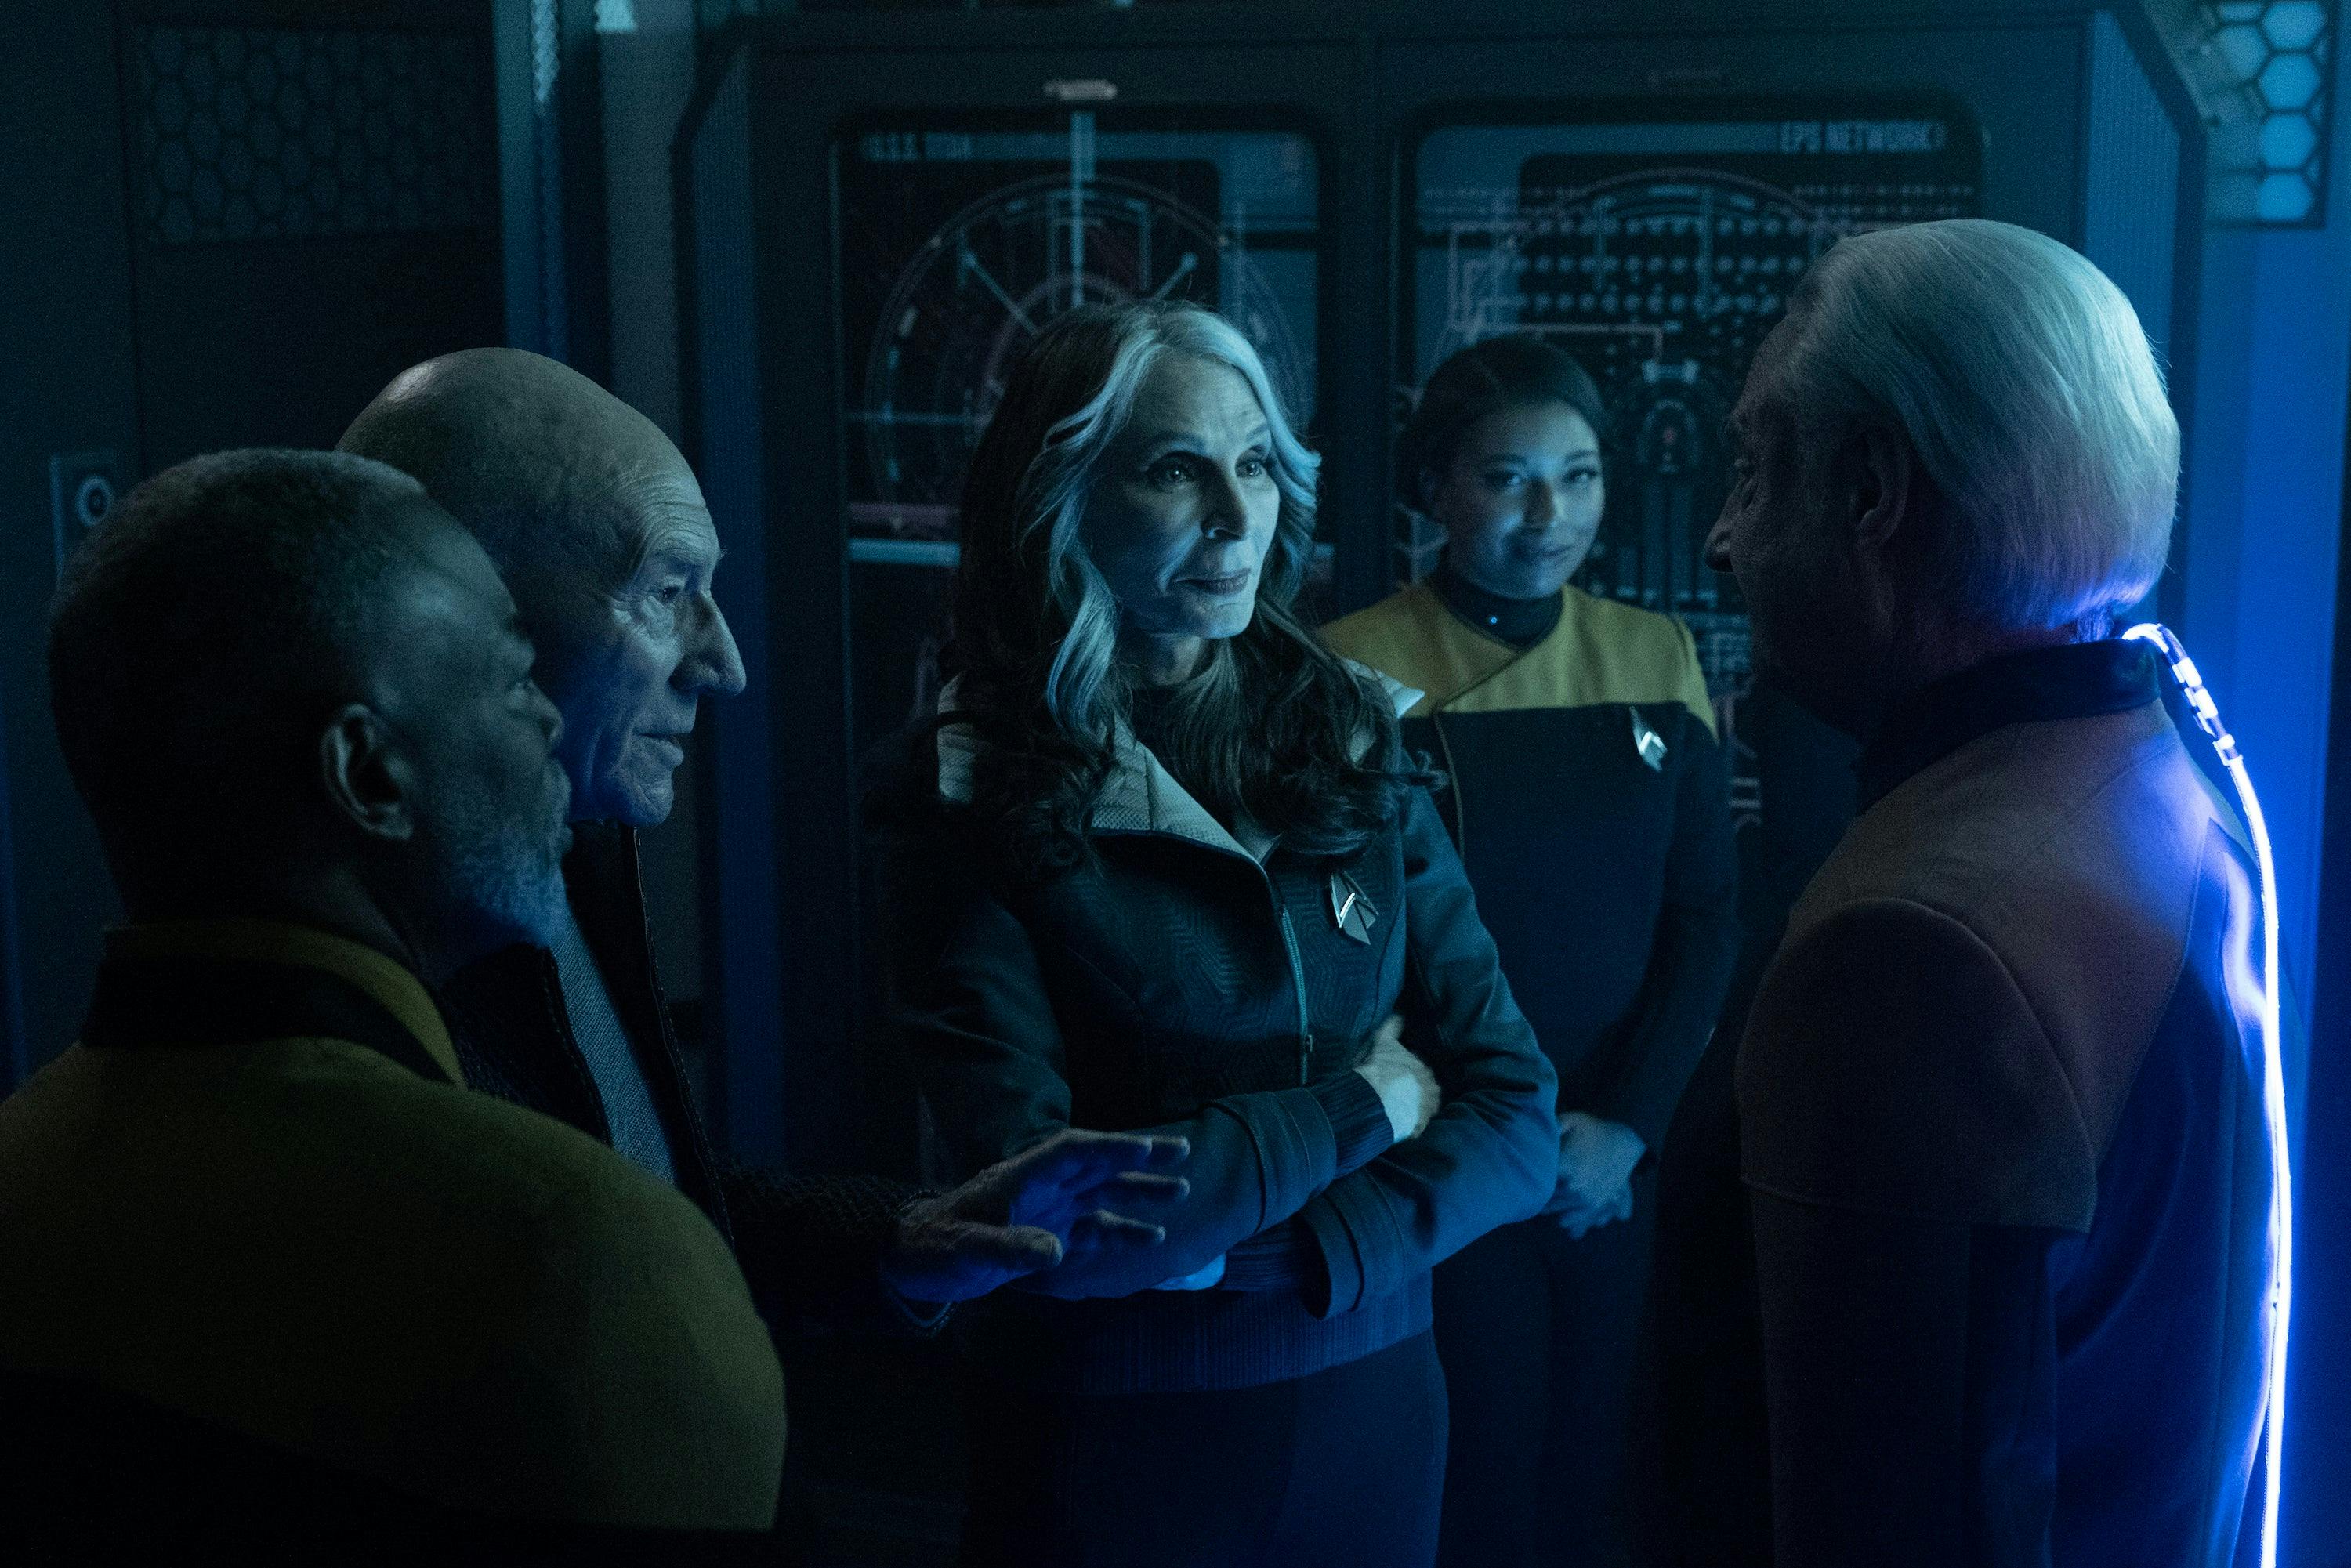 Geordi La Forge, Jean-Luc Picard, Beverly Crusher, and Alandra smile as they all face Data